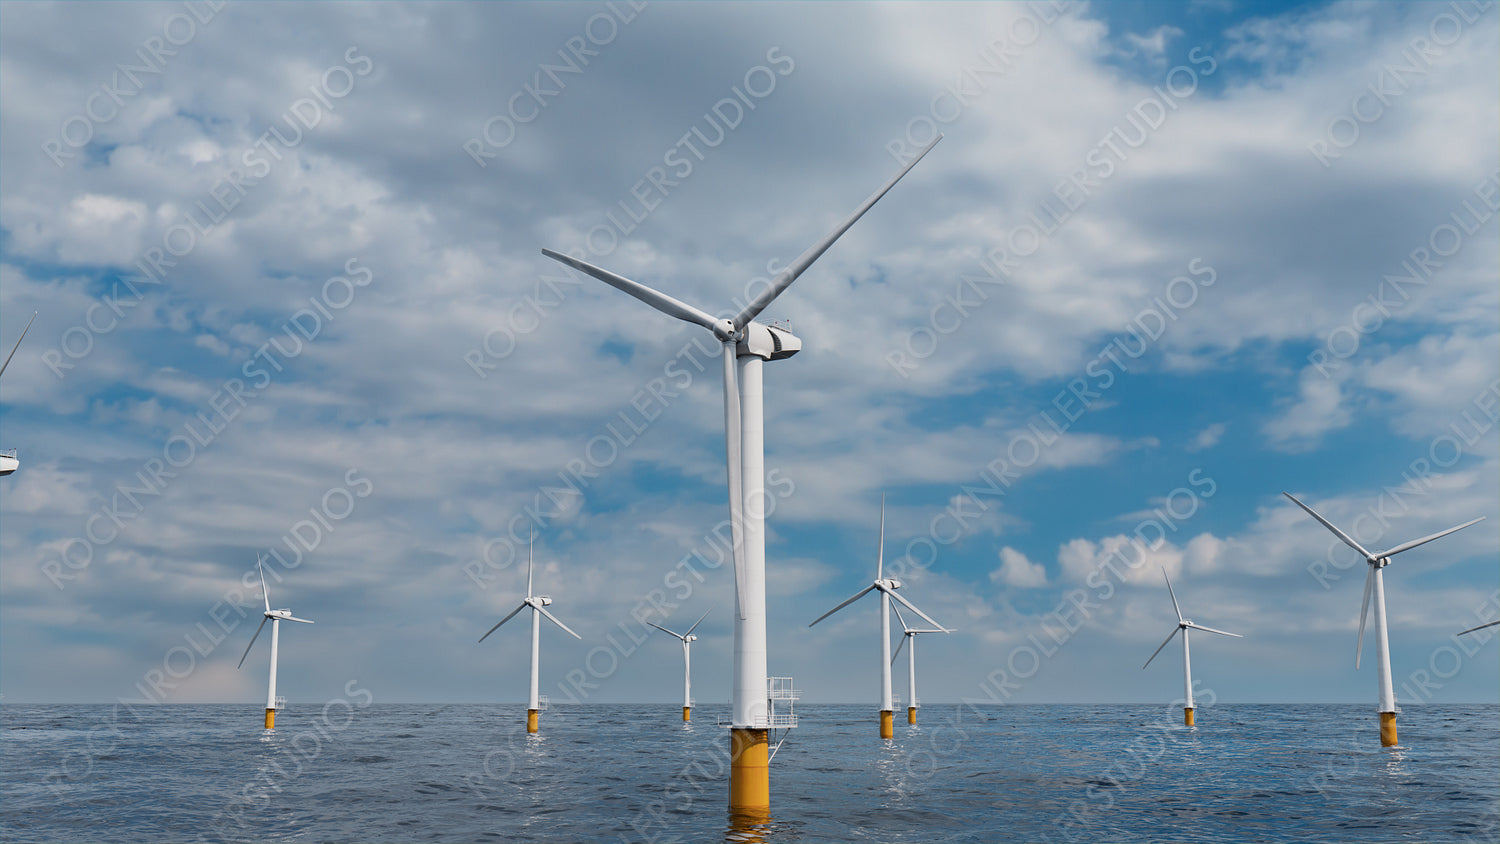 Wind Turbines. Offshore Wind Farm on a Cloudy Afternoon. Clean Power Concept.